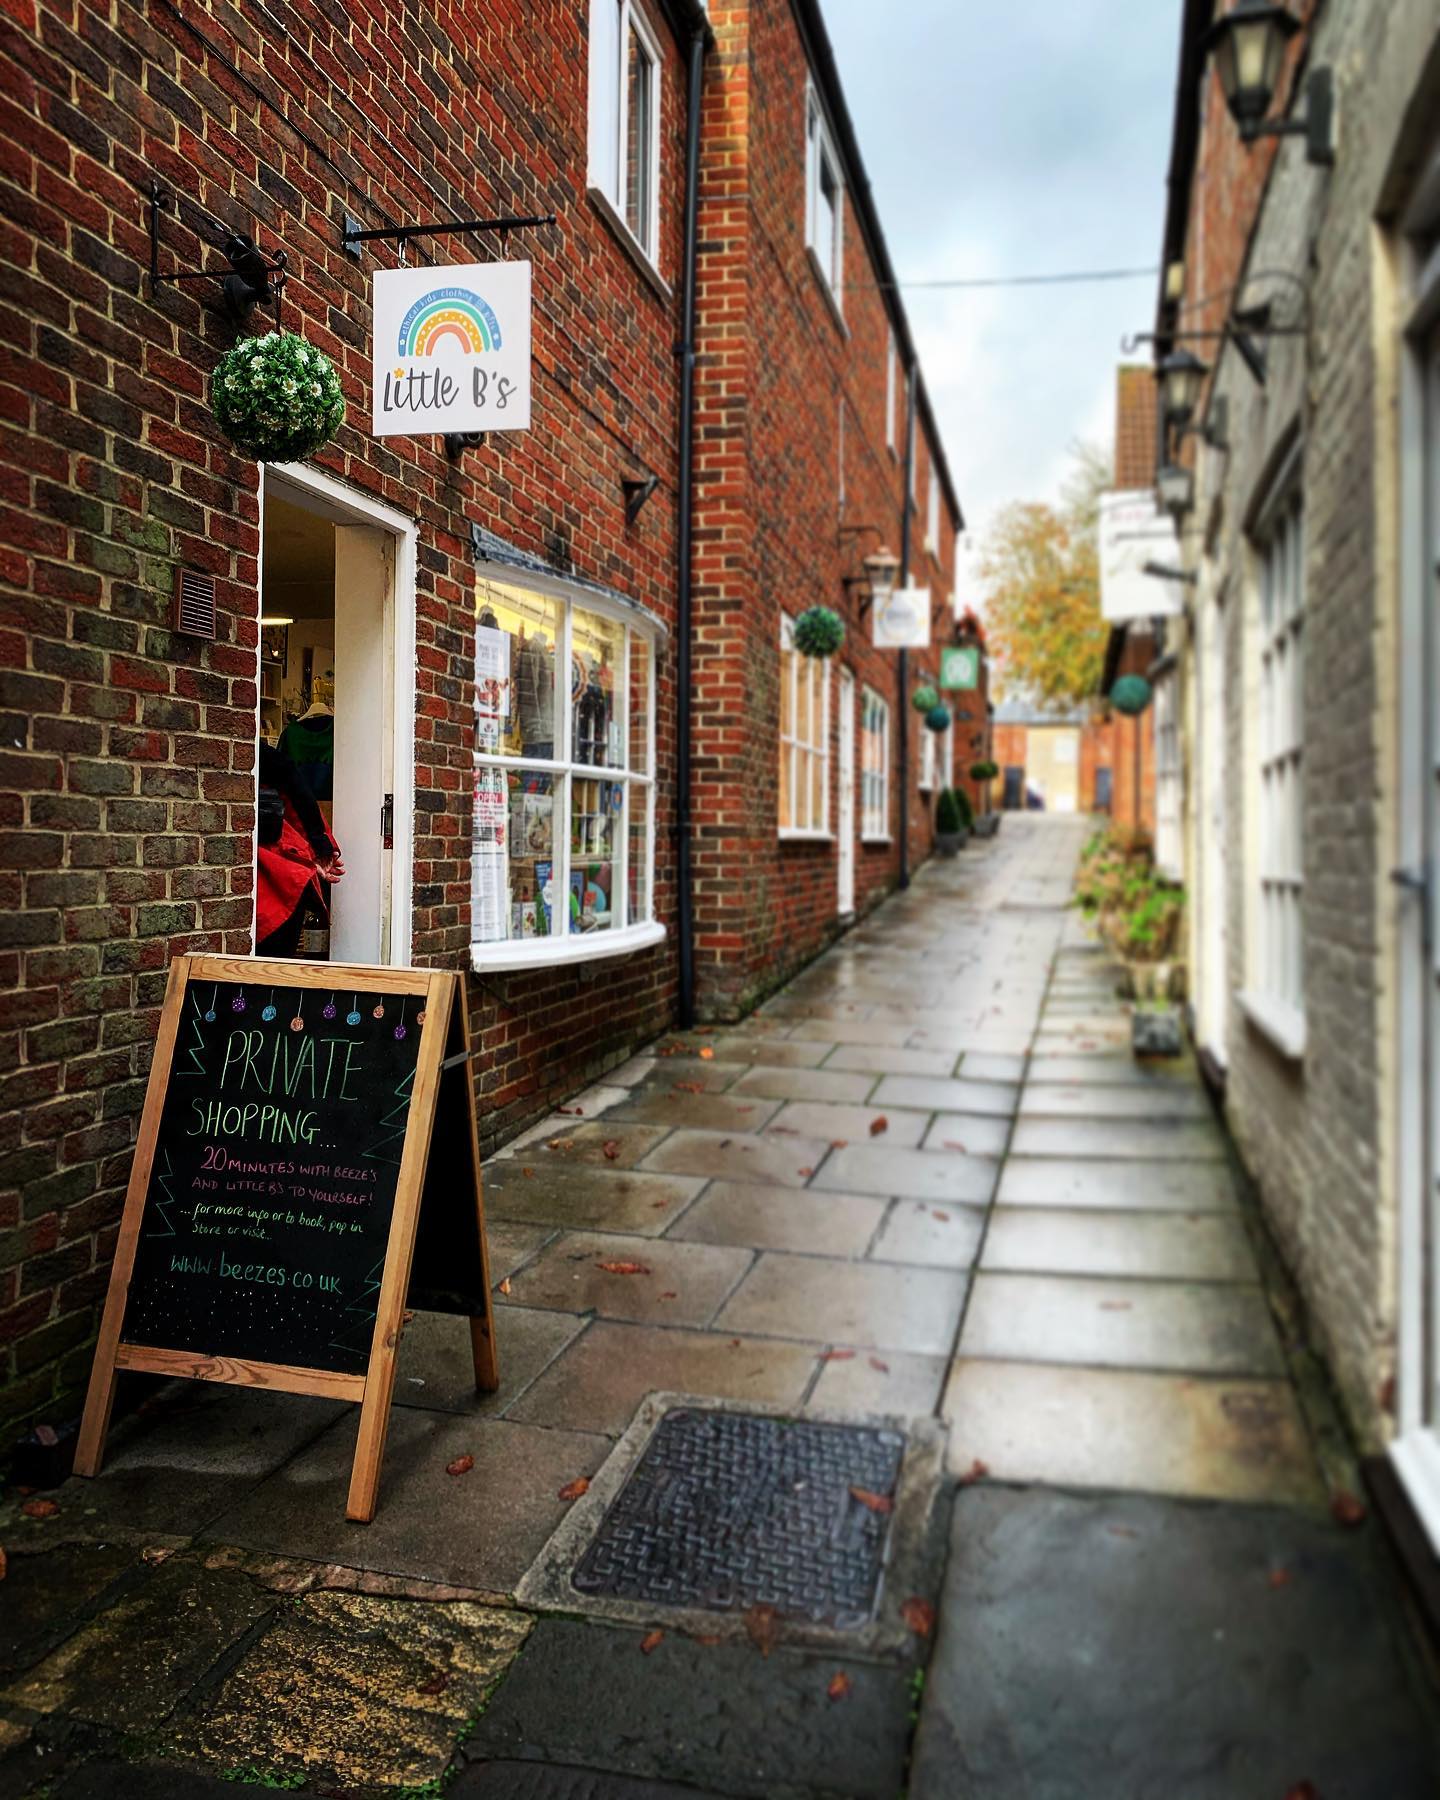 We made a delivery of products to @beezes.devizes today. If you haven’t visited before, it’s a treasure trove of handcrafted loveliness, situated down a beautiful little alleyway off the Marketplace in Devizes. So many fabulous products from lots of local artists and makers. ....#supportsmallbusinesses #shophandmade #shopsmall #craft #maker #artisan #giftideas #allunderoneroof #devizes #historicmarkettown